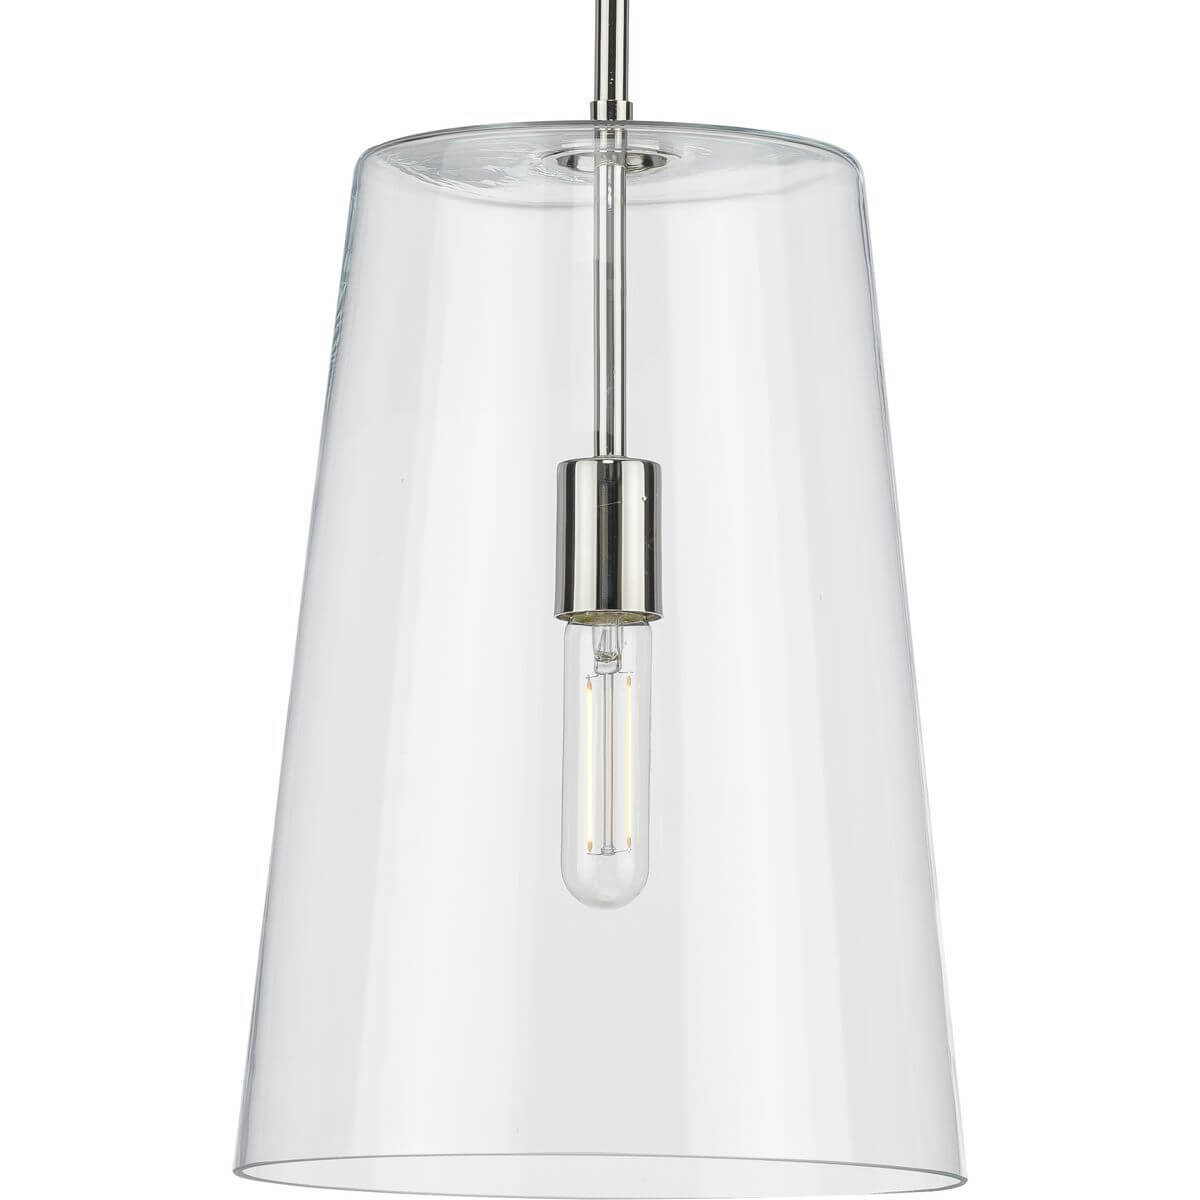 Progress Lighting Clarion 1 Light 11 inch Pendant in Polished Nickel with Clear Glass P500242-104